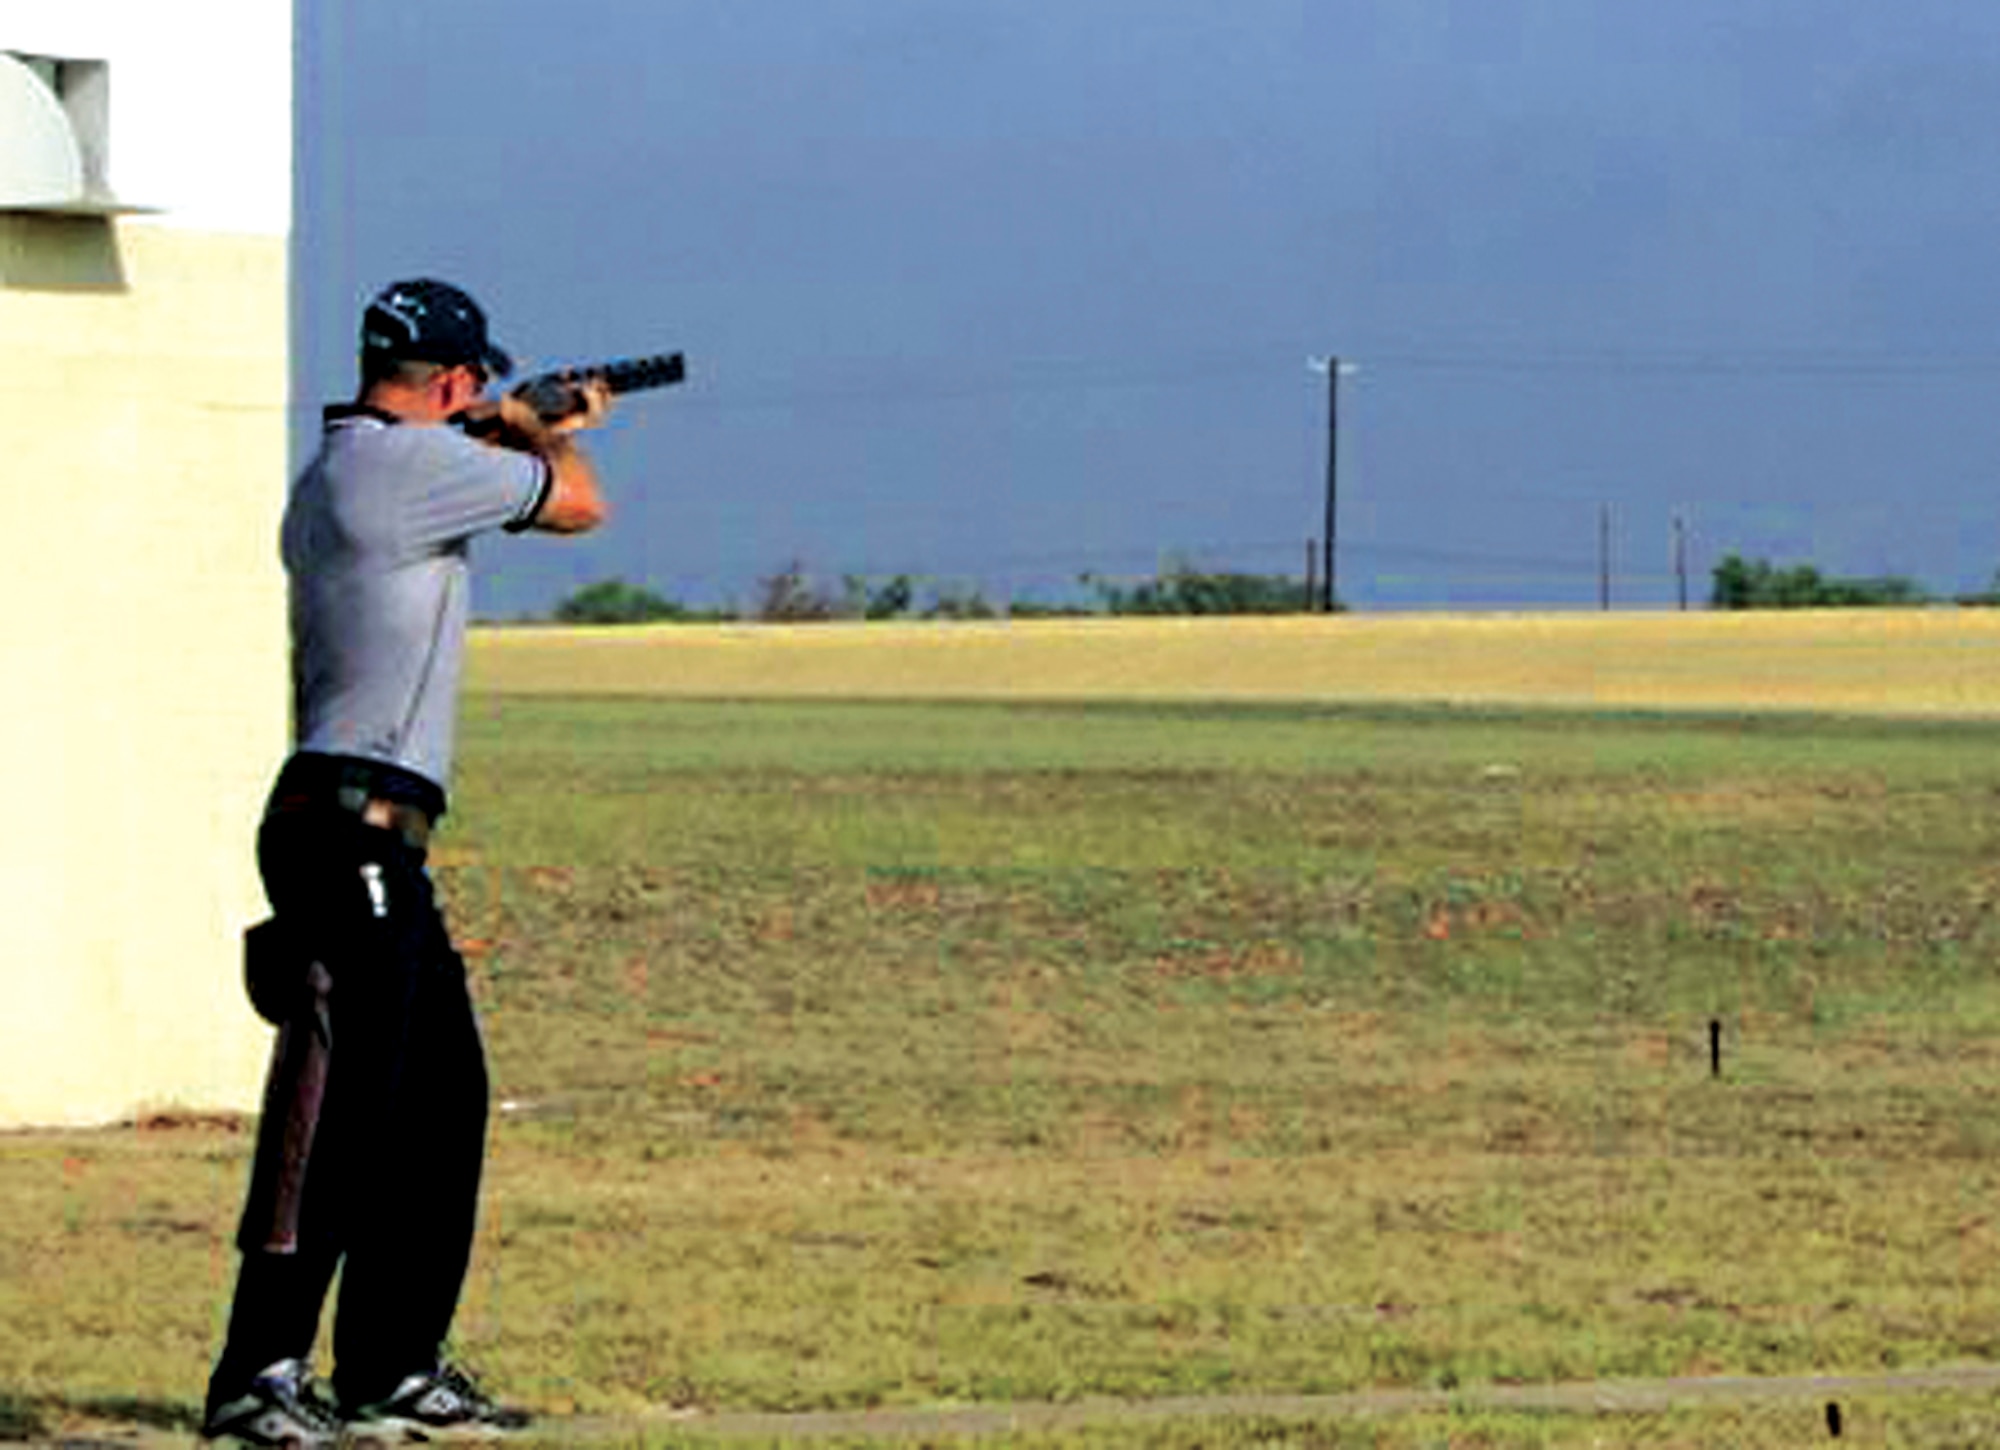 Master Sgt. Stuart Brown, 4th Maintenance Operations Squadron,  competes on the Air Force American Skeet Team in the 2006 World Skeet Championships Oct. 6-14 in San Antonio.